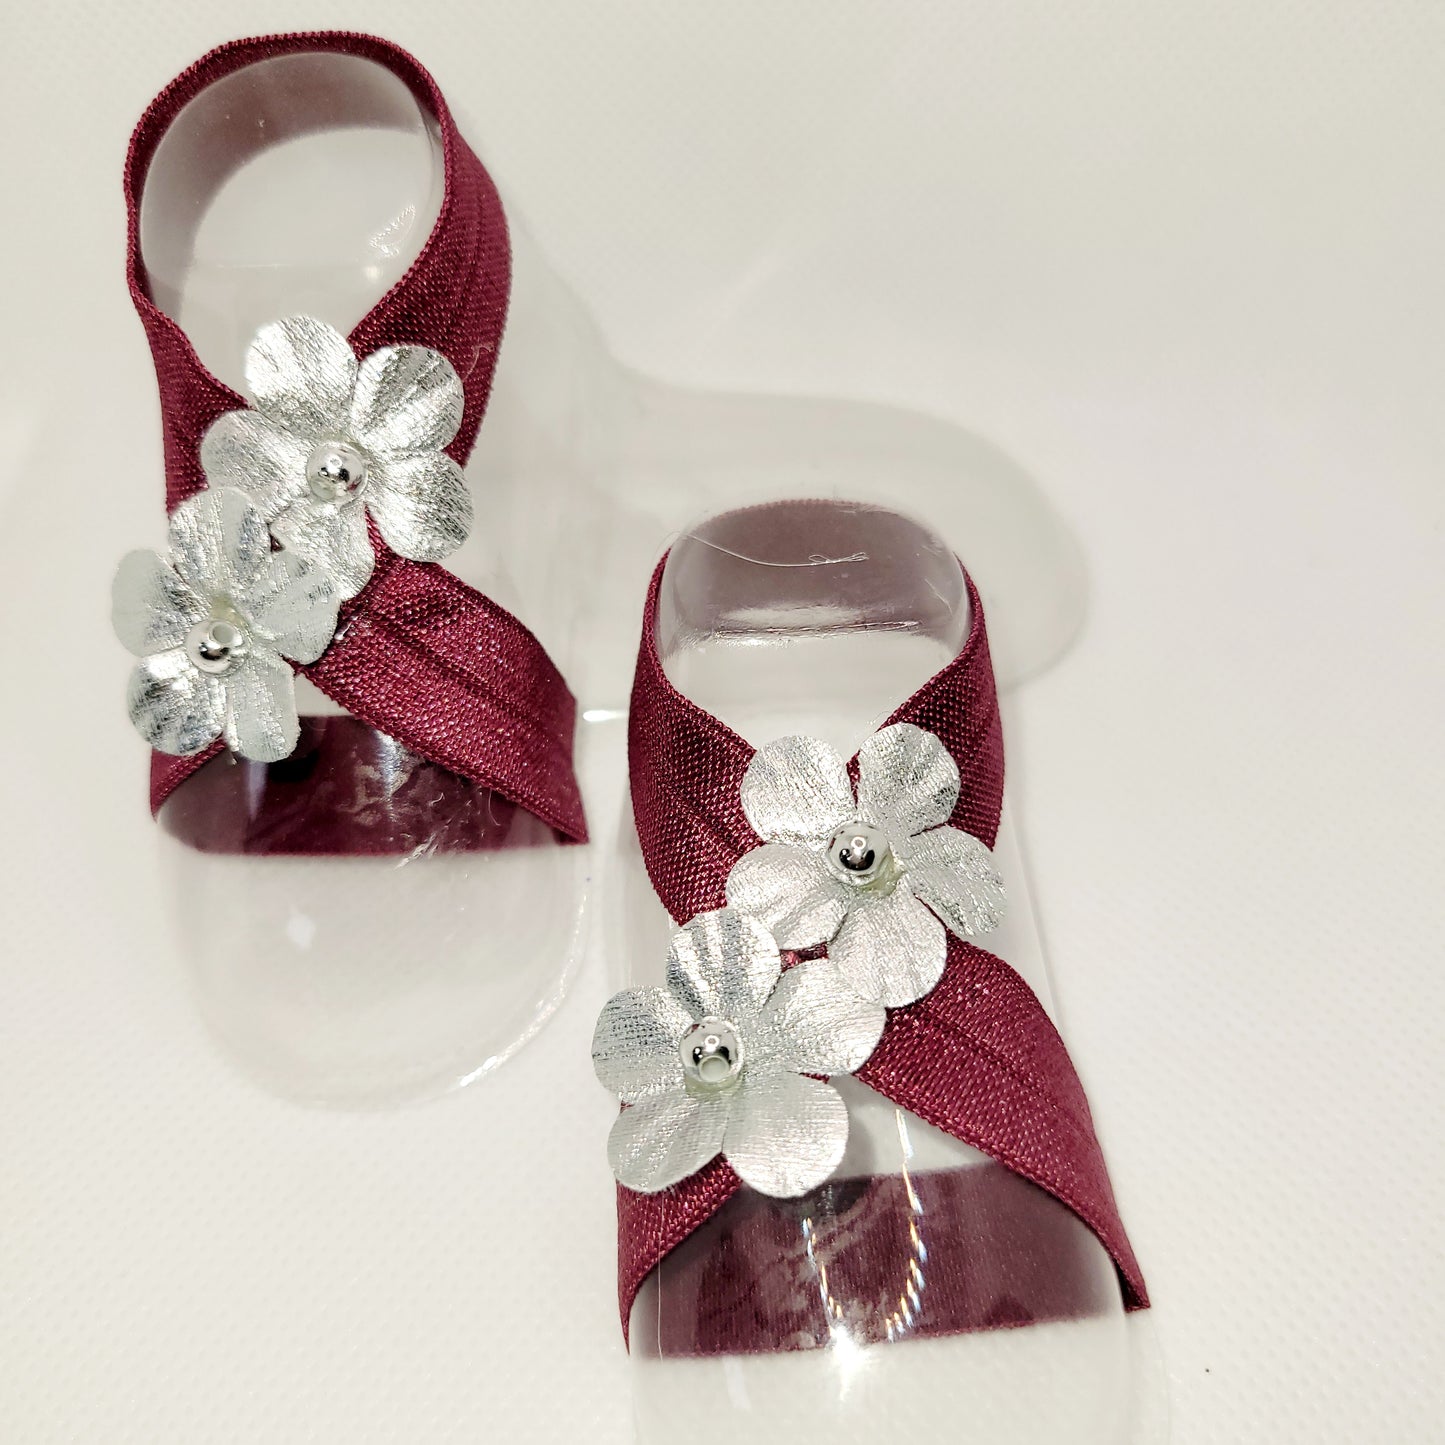 Burgundy and Gray Barefoot Sandals For Baby Girl